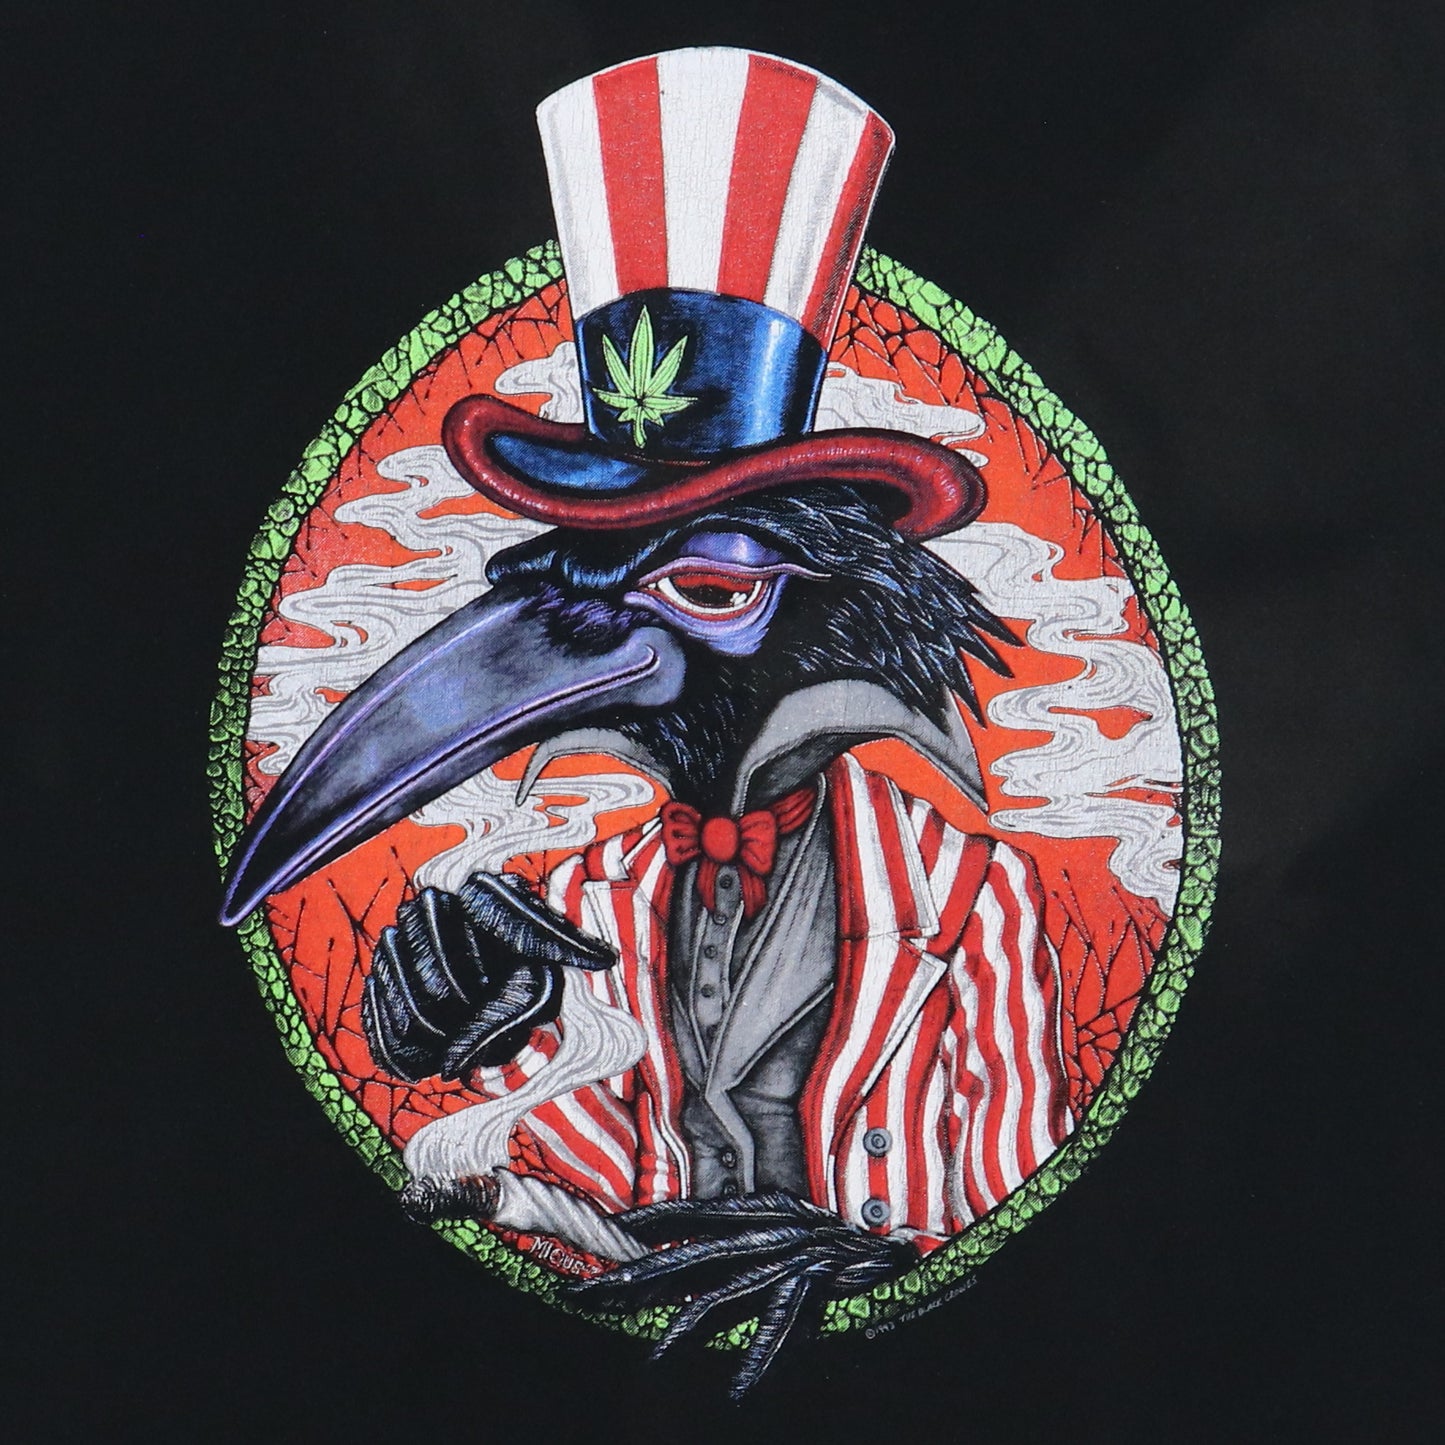 1993 Black Crowes High As The Moon Tour Shirt